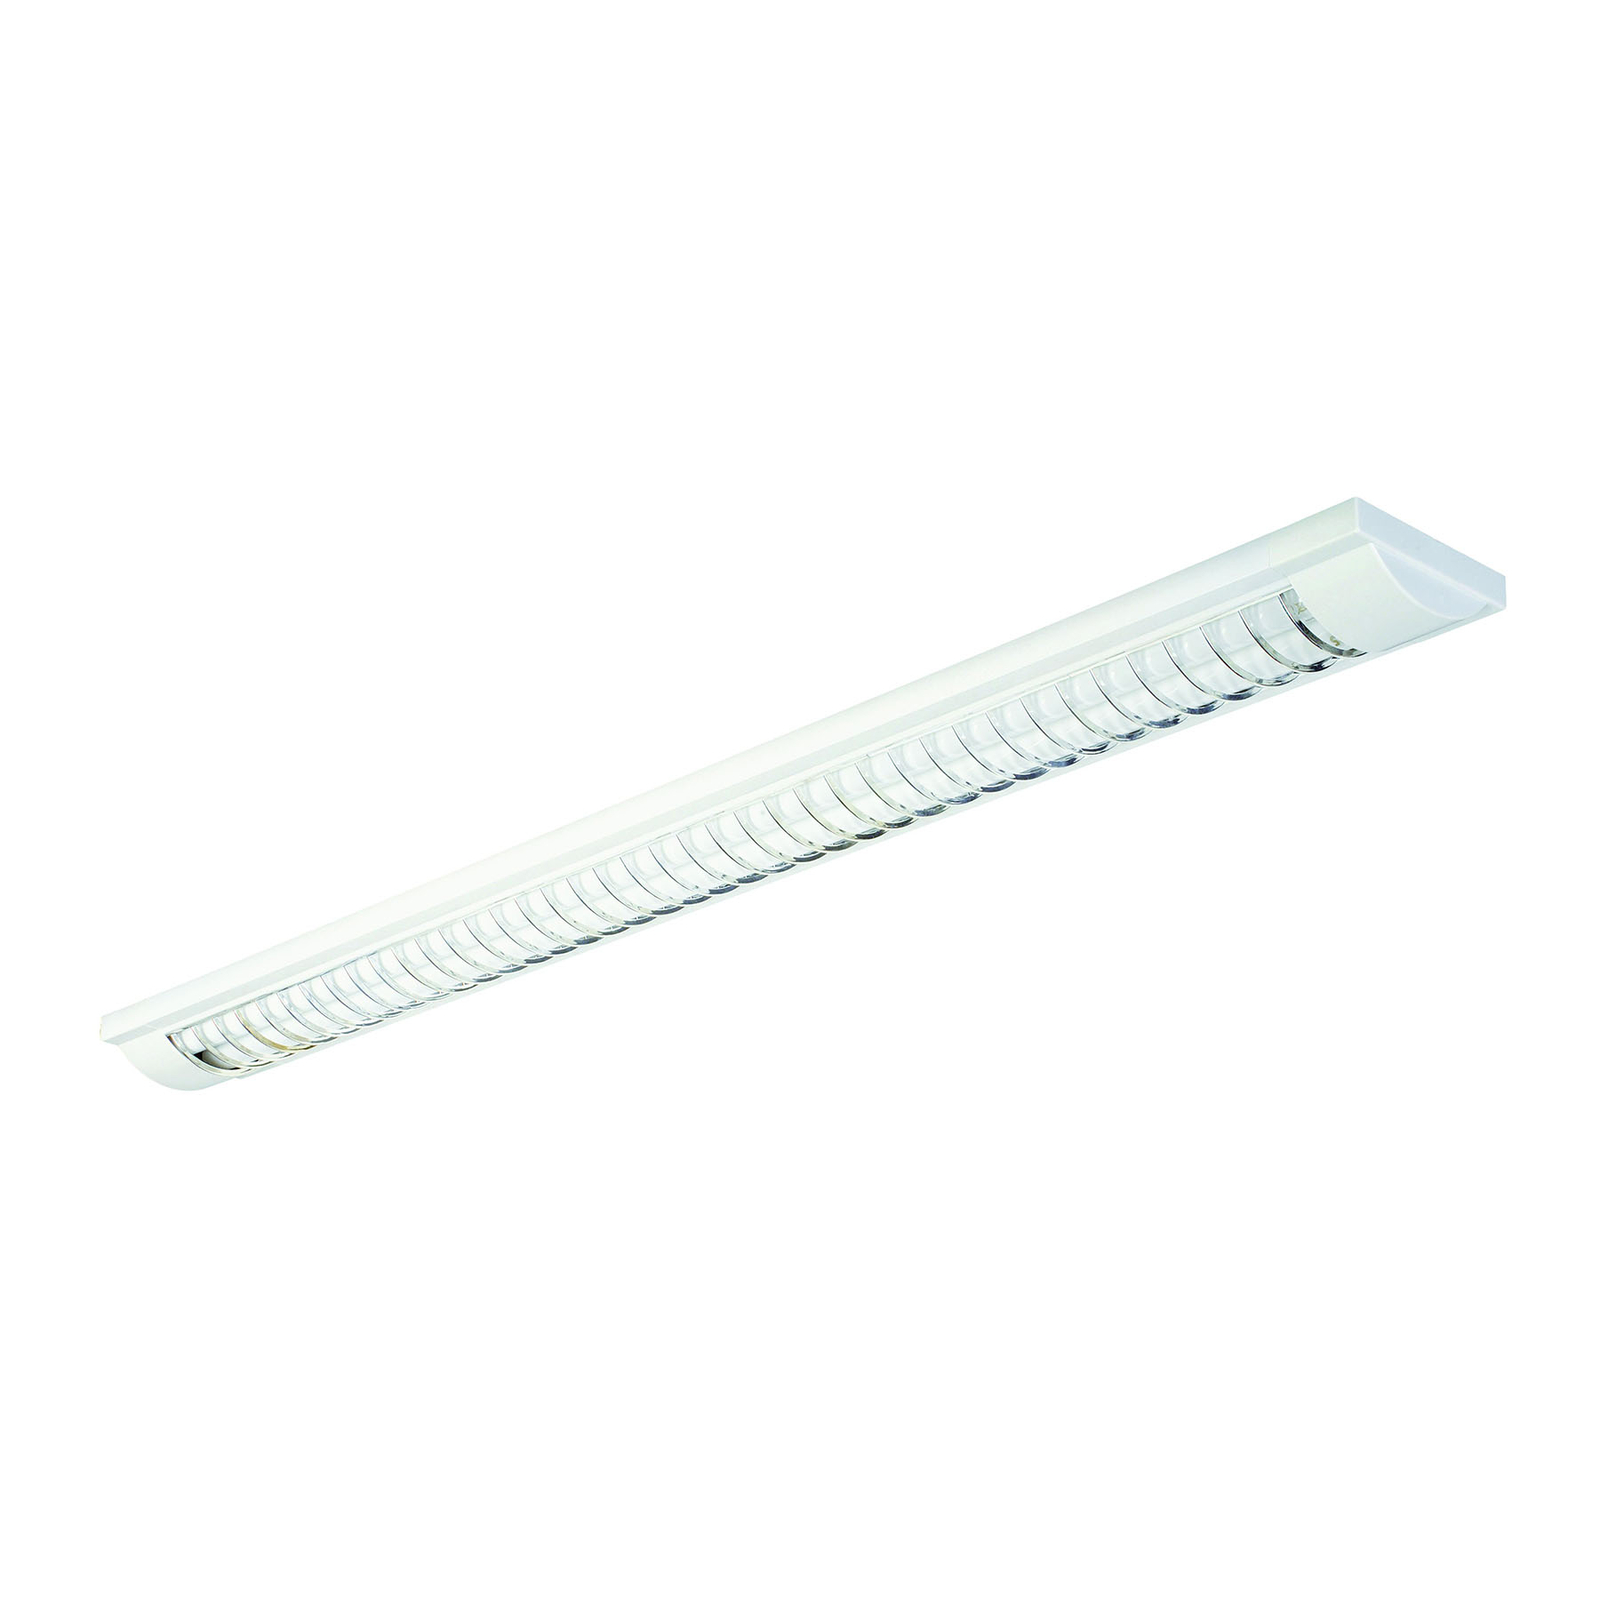 444 LED louvre light with G13/T8, white